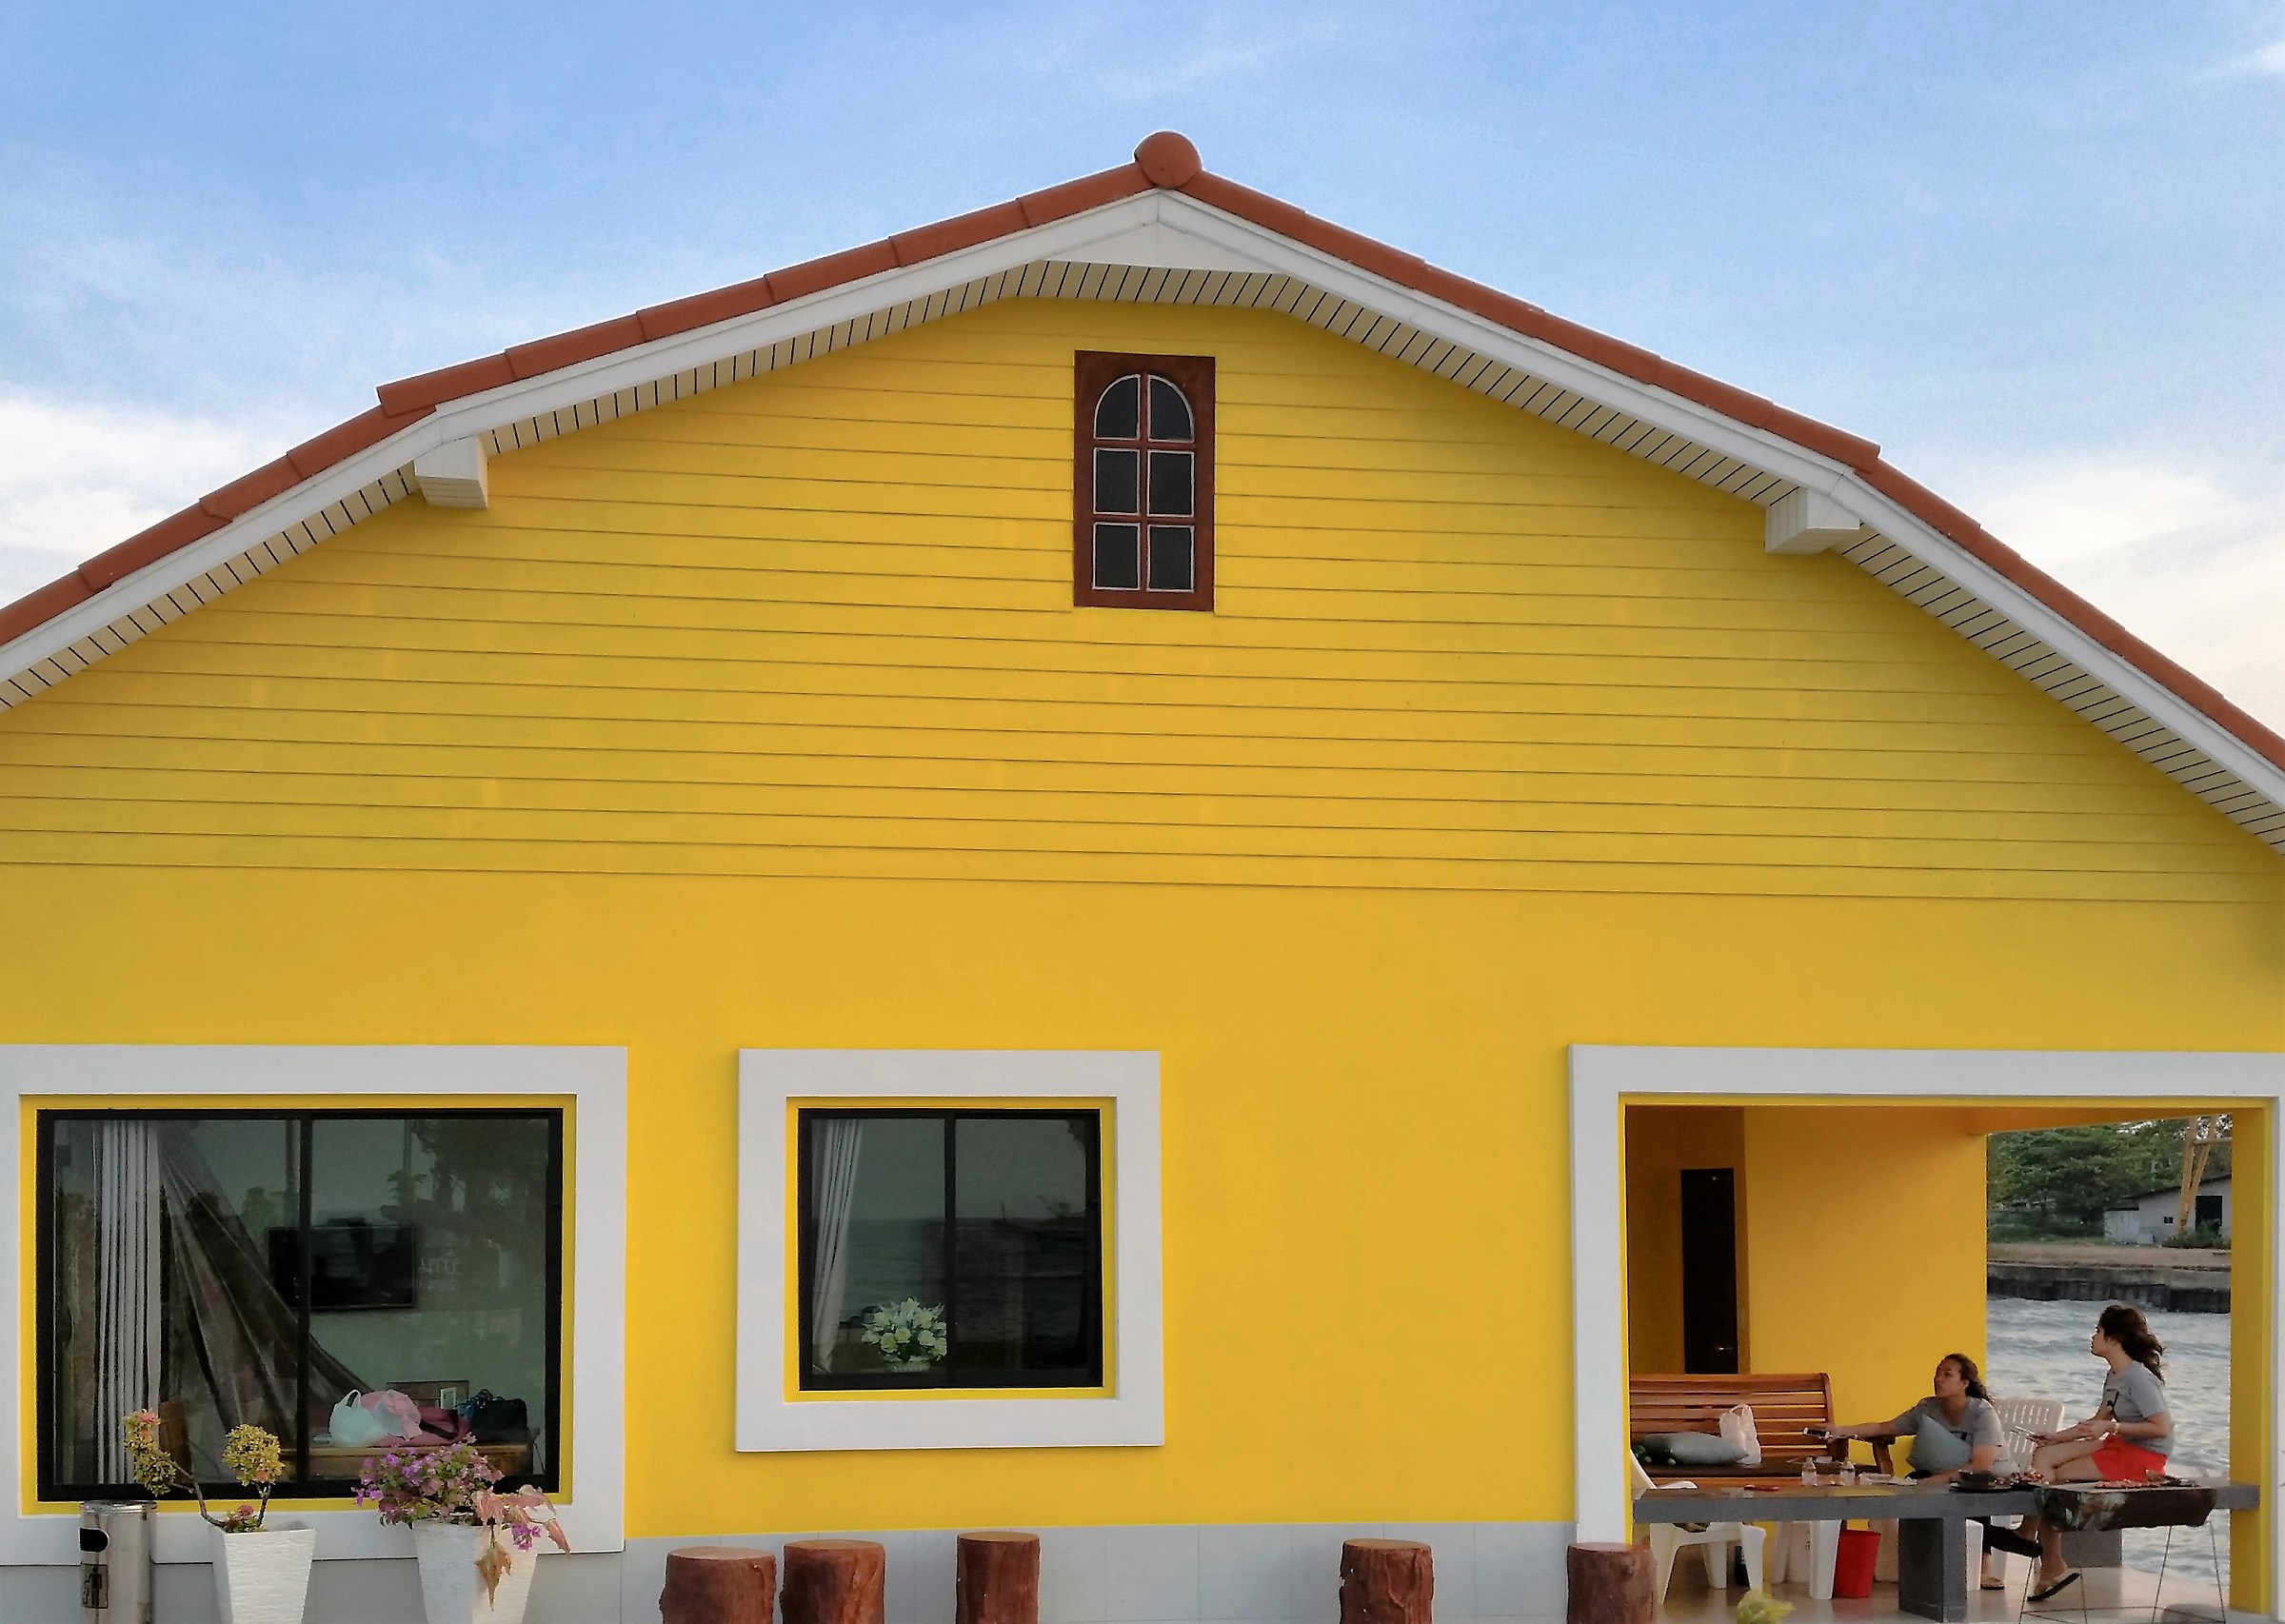 The Yellow House...